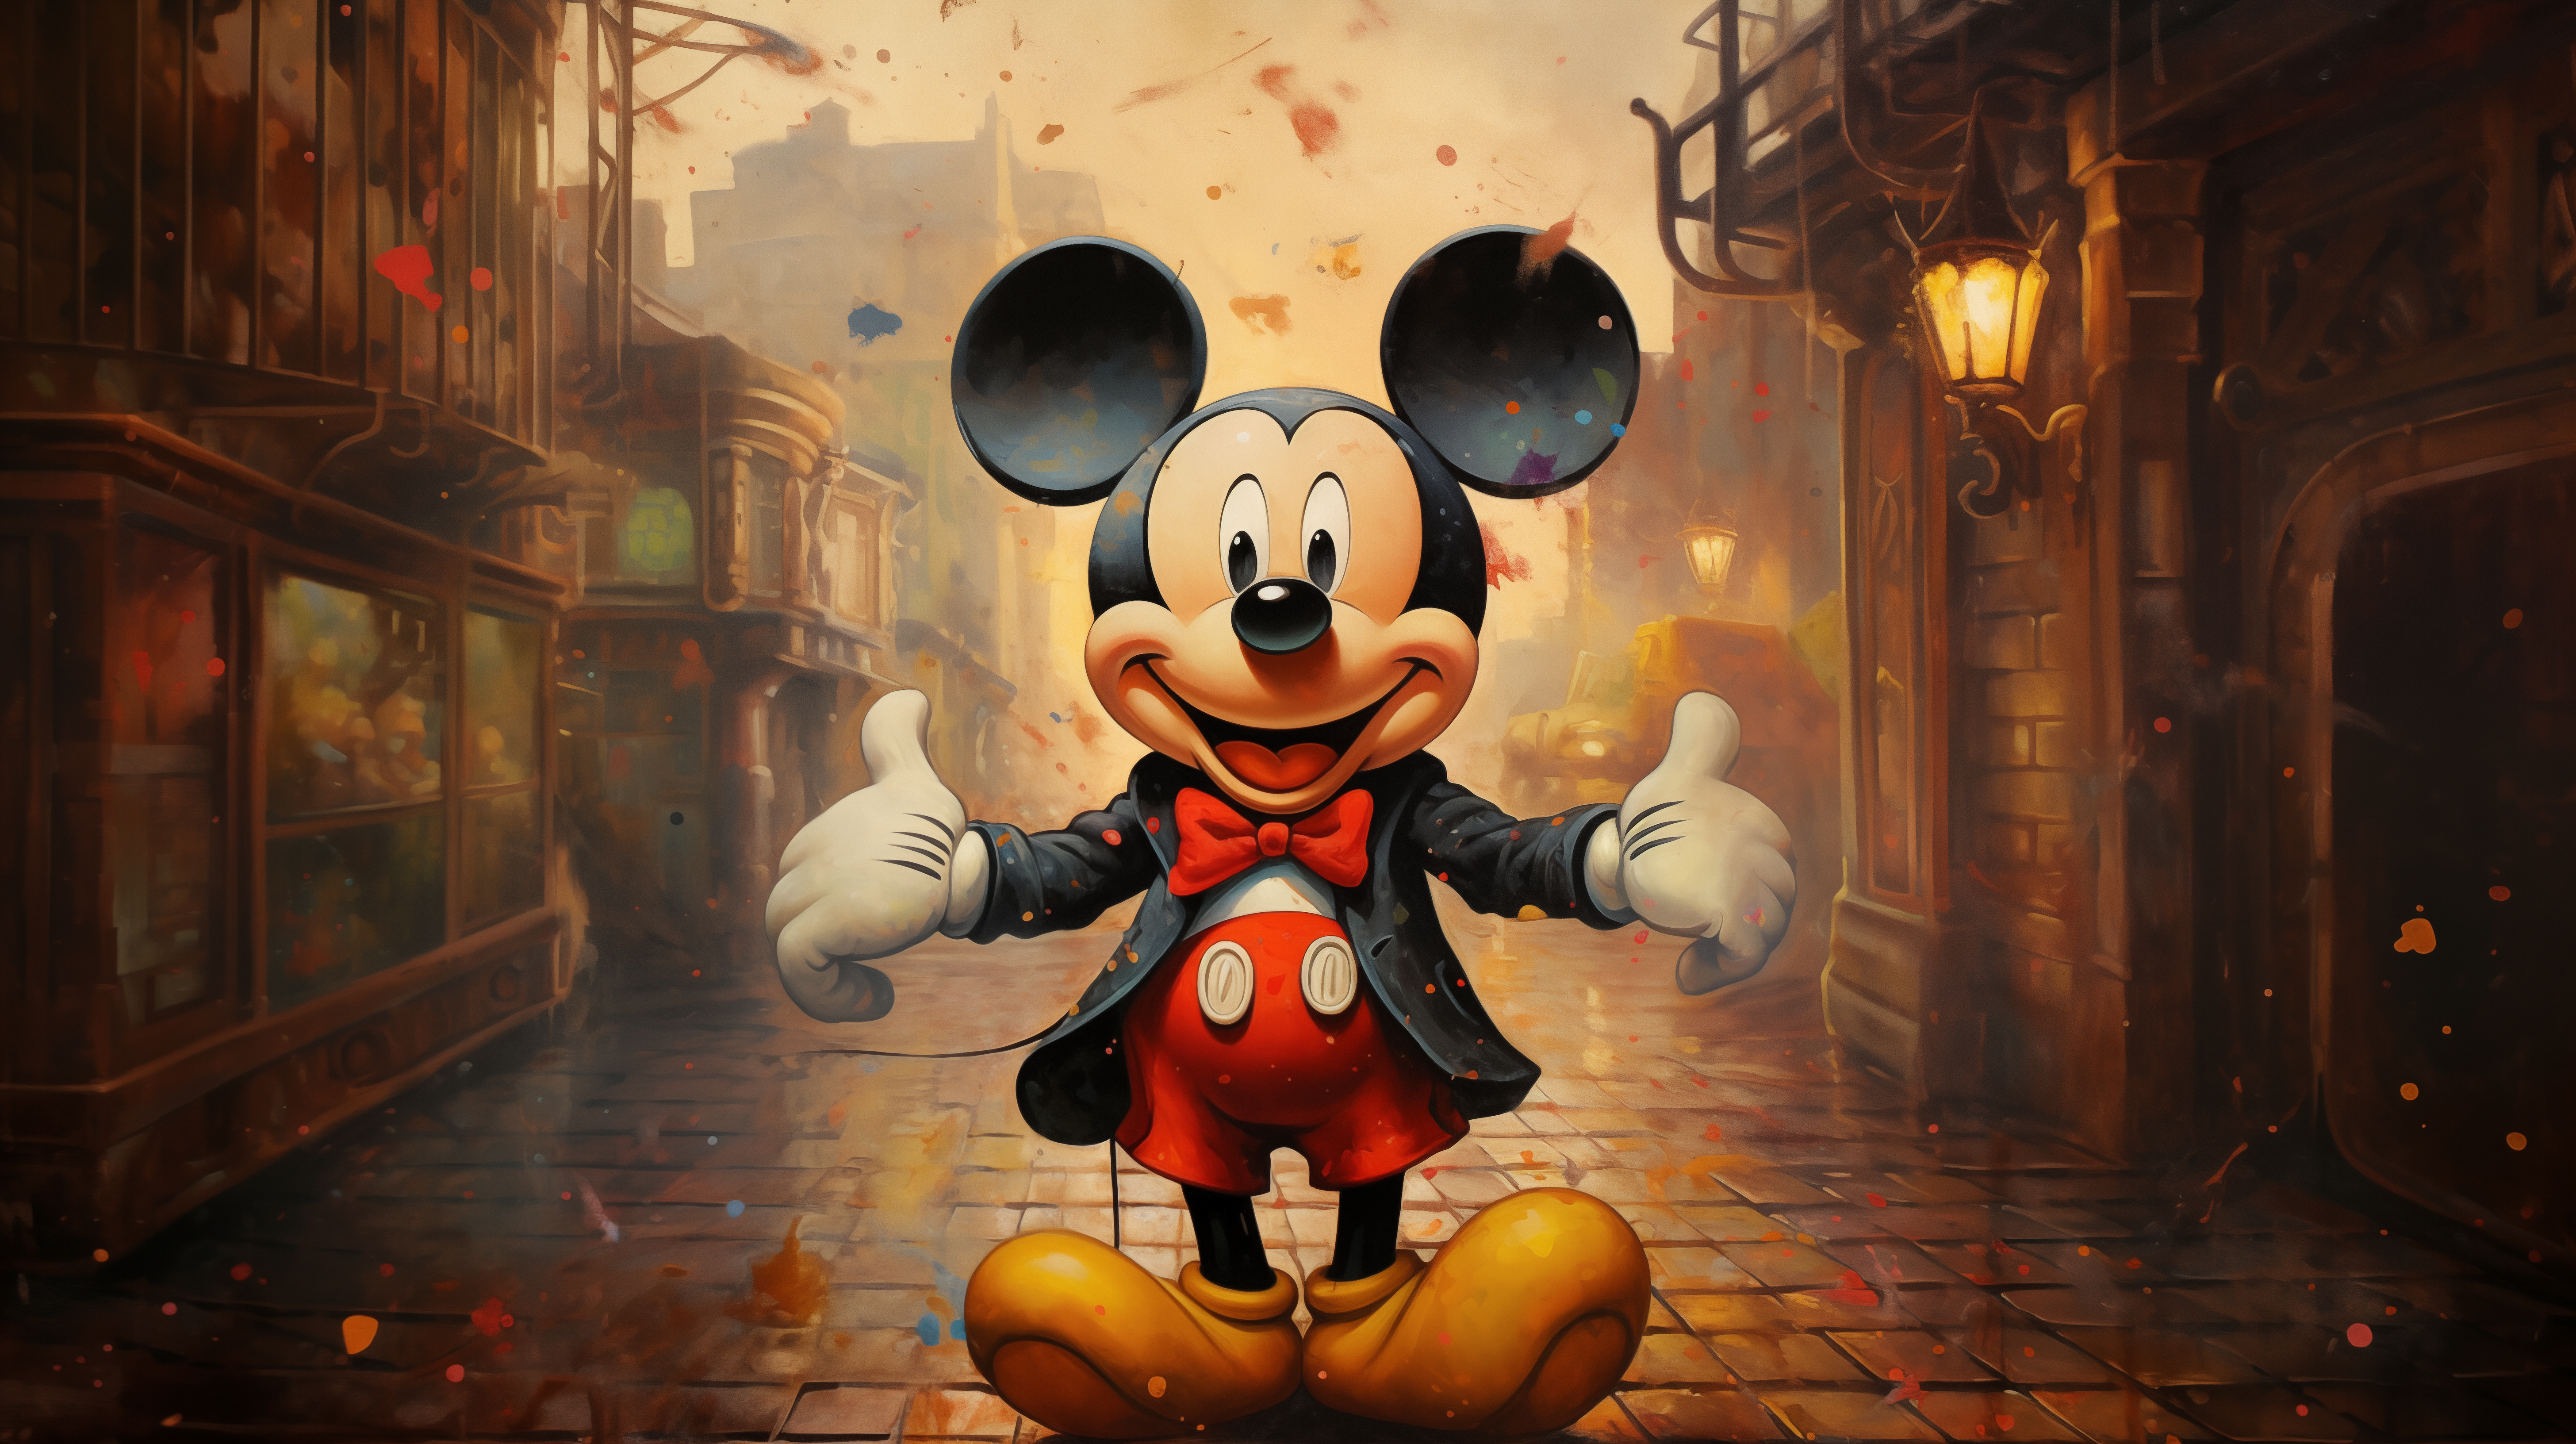 HD desktop wallpaper featuring Disney's Mickey Mouse with thumbs up in a whimsical, vintage street background, perfect for Disney-themed computer backgrounds and Mickey Mouse fans.